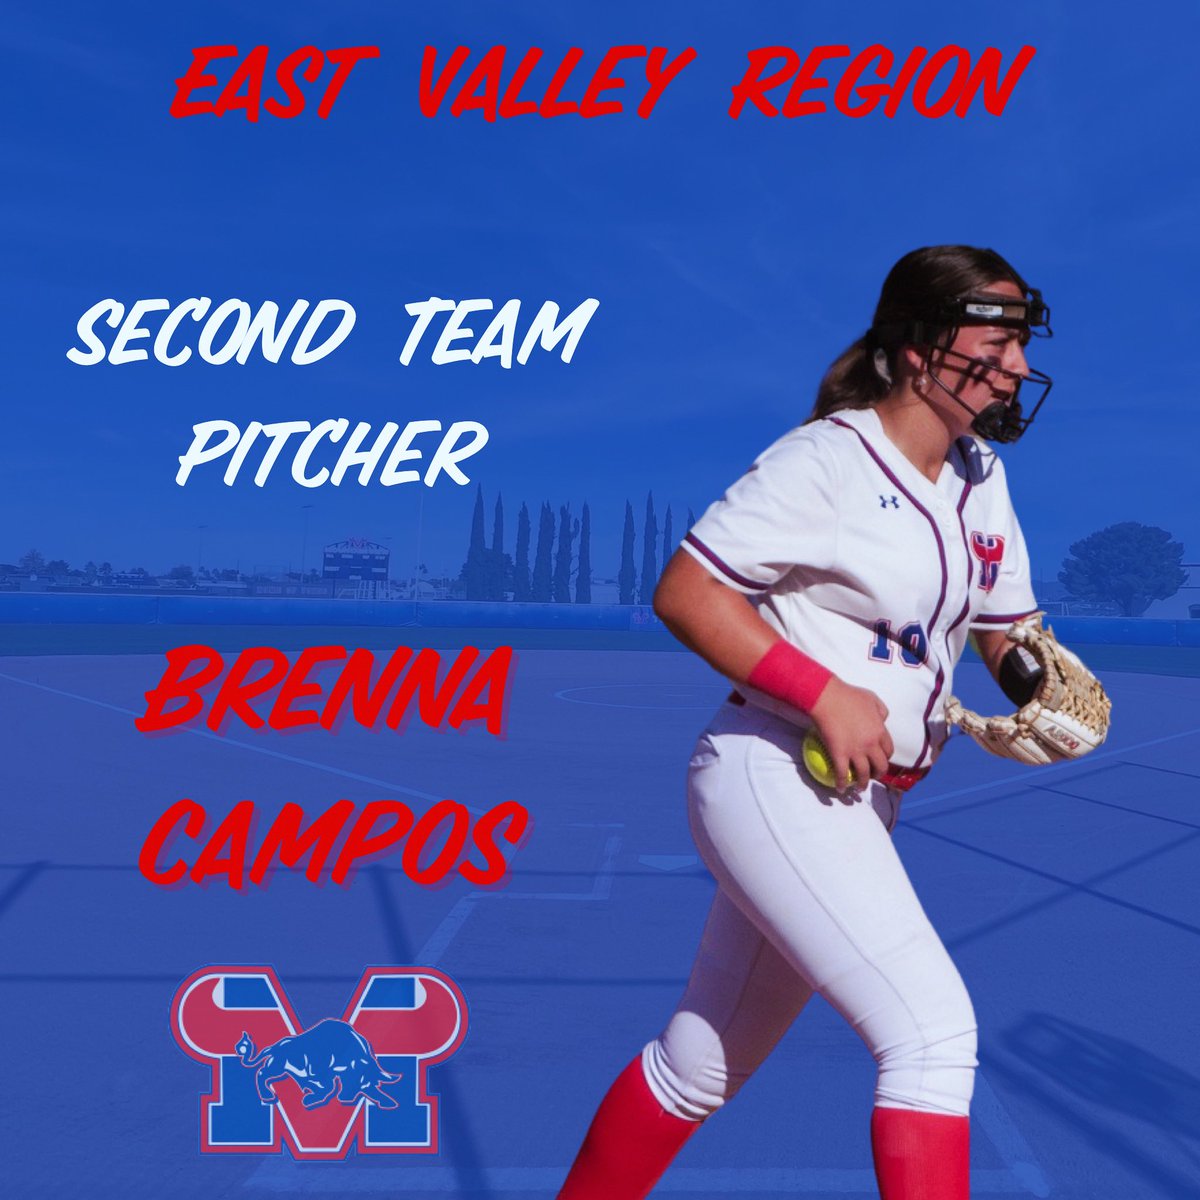 Junior Brenna Campos is awarded Second Team Pitcher for East Valley Region. Congratulations on a great season Brenna!